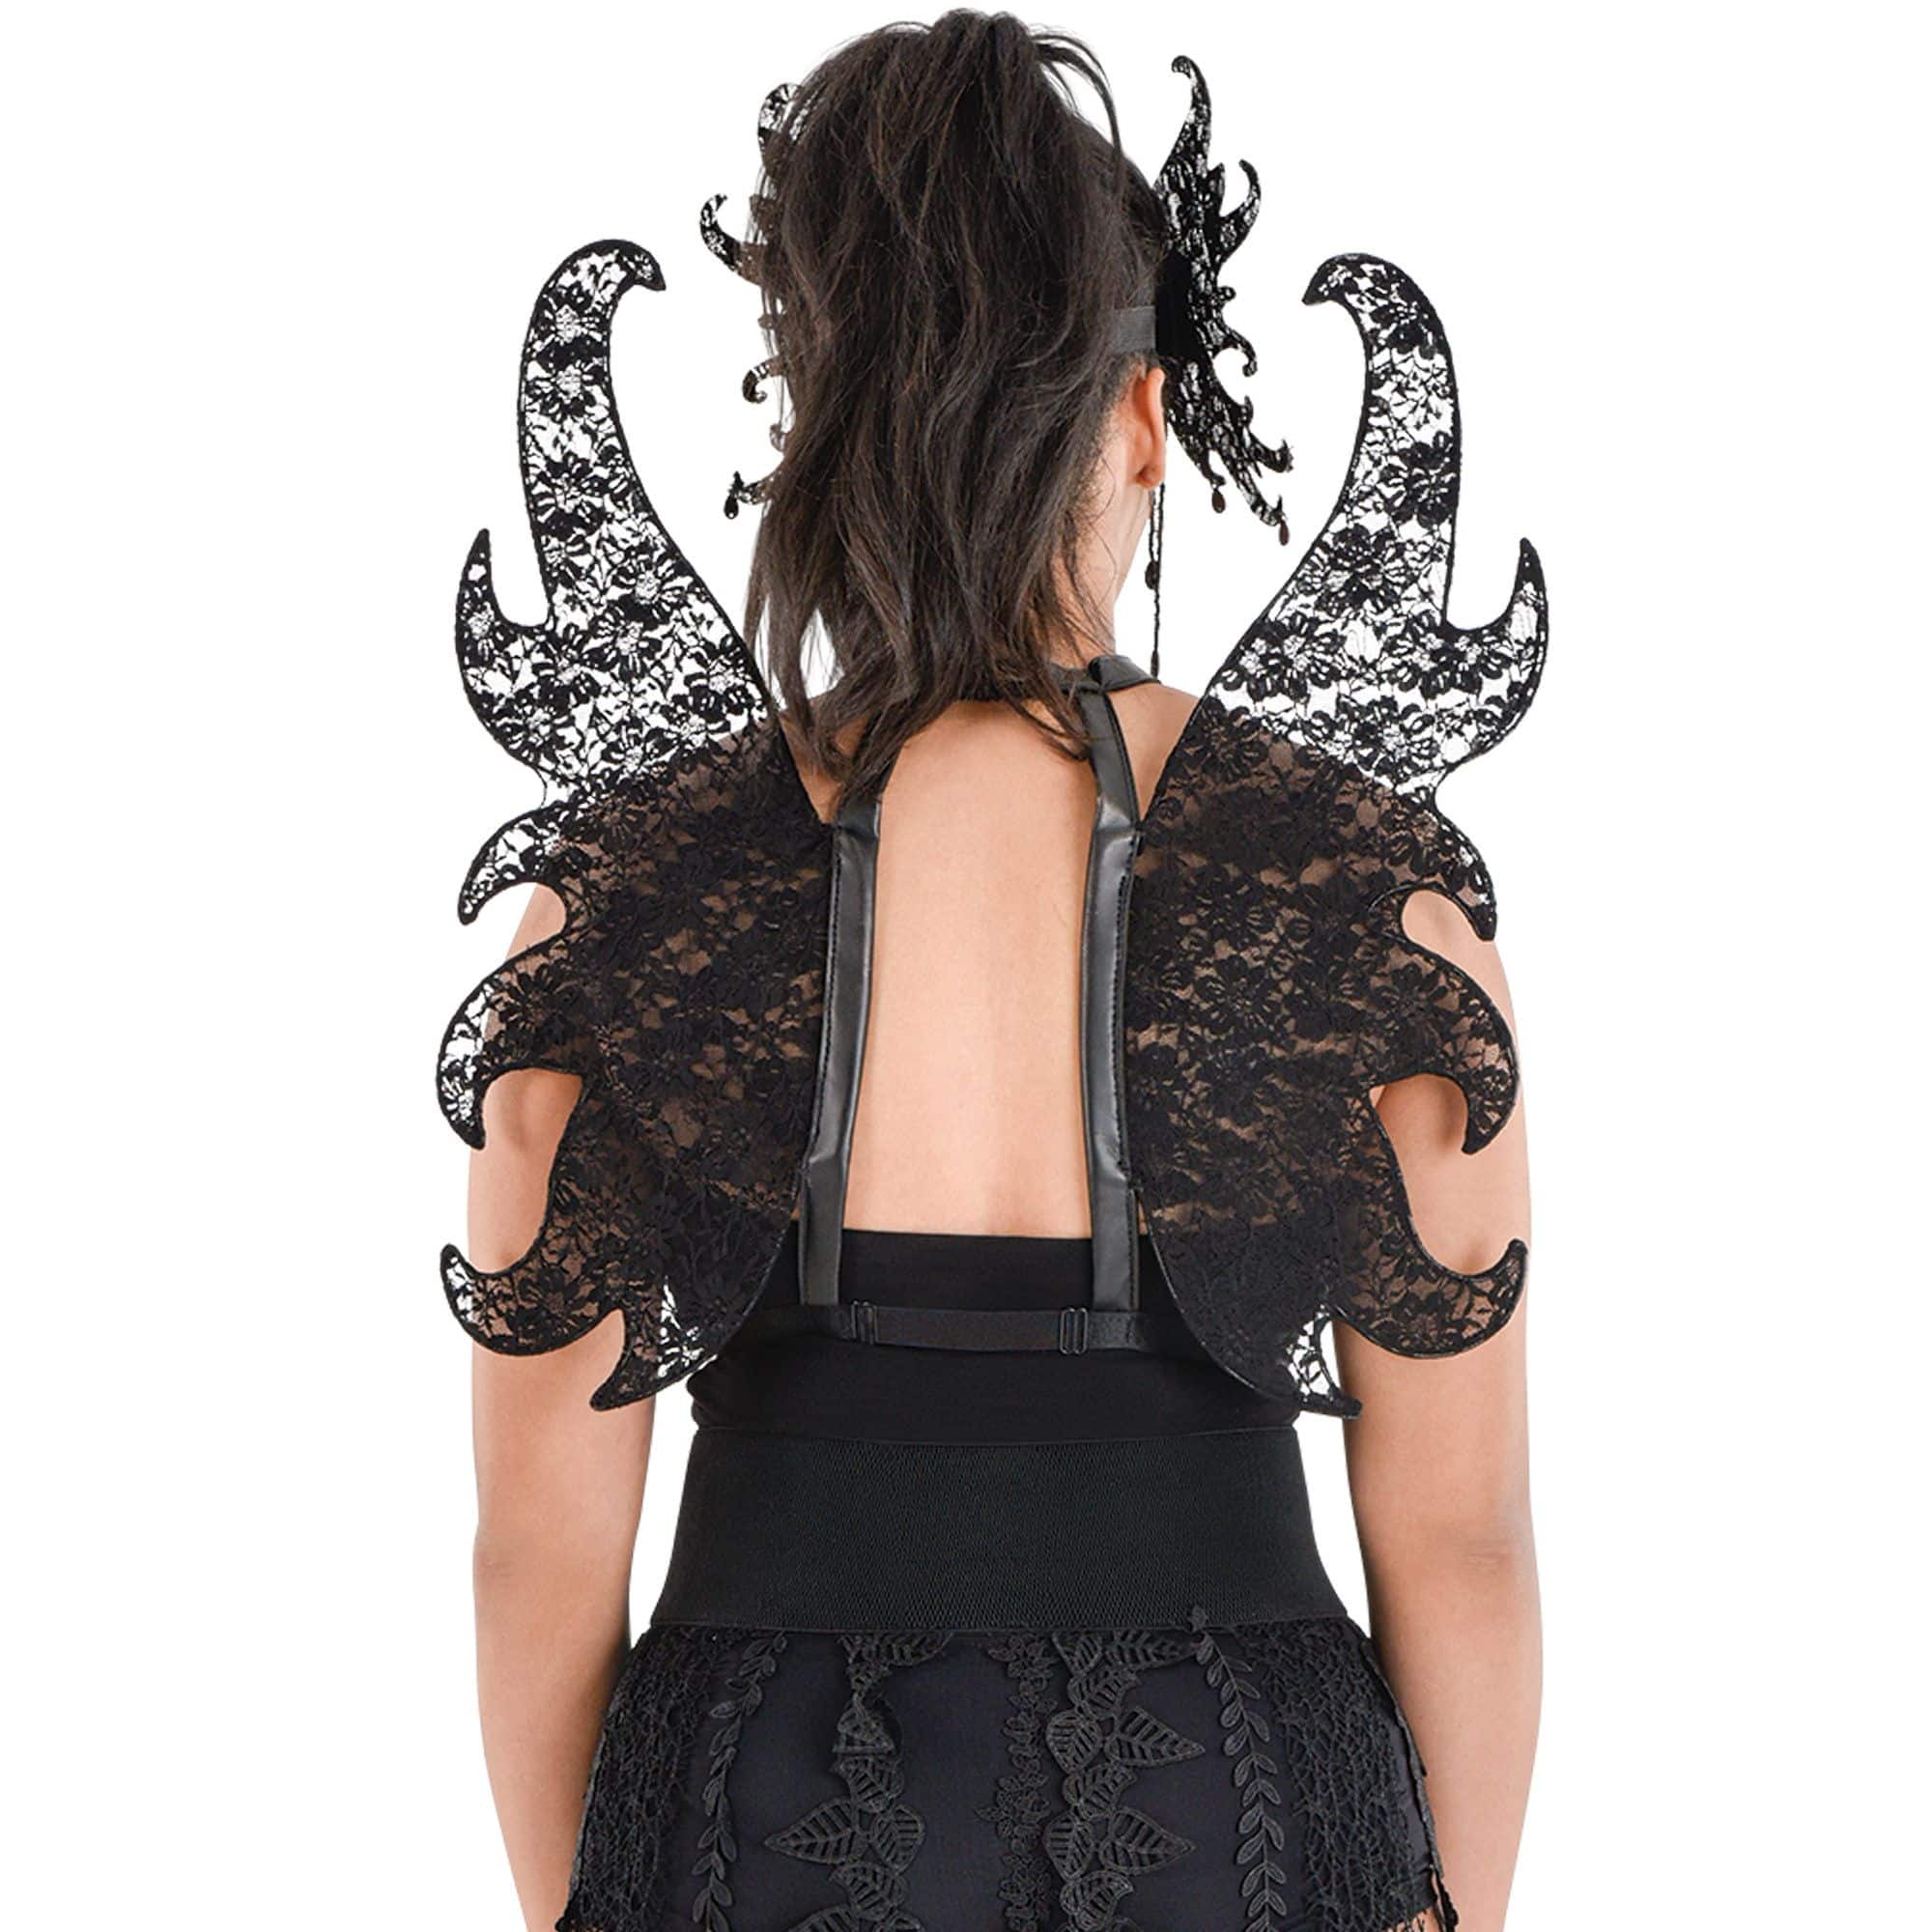 Goth Pixie Lace Wing Harness, Black, One Size, Wearable Costume